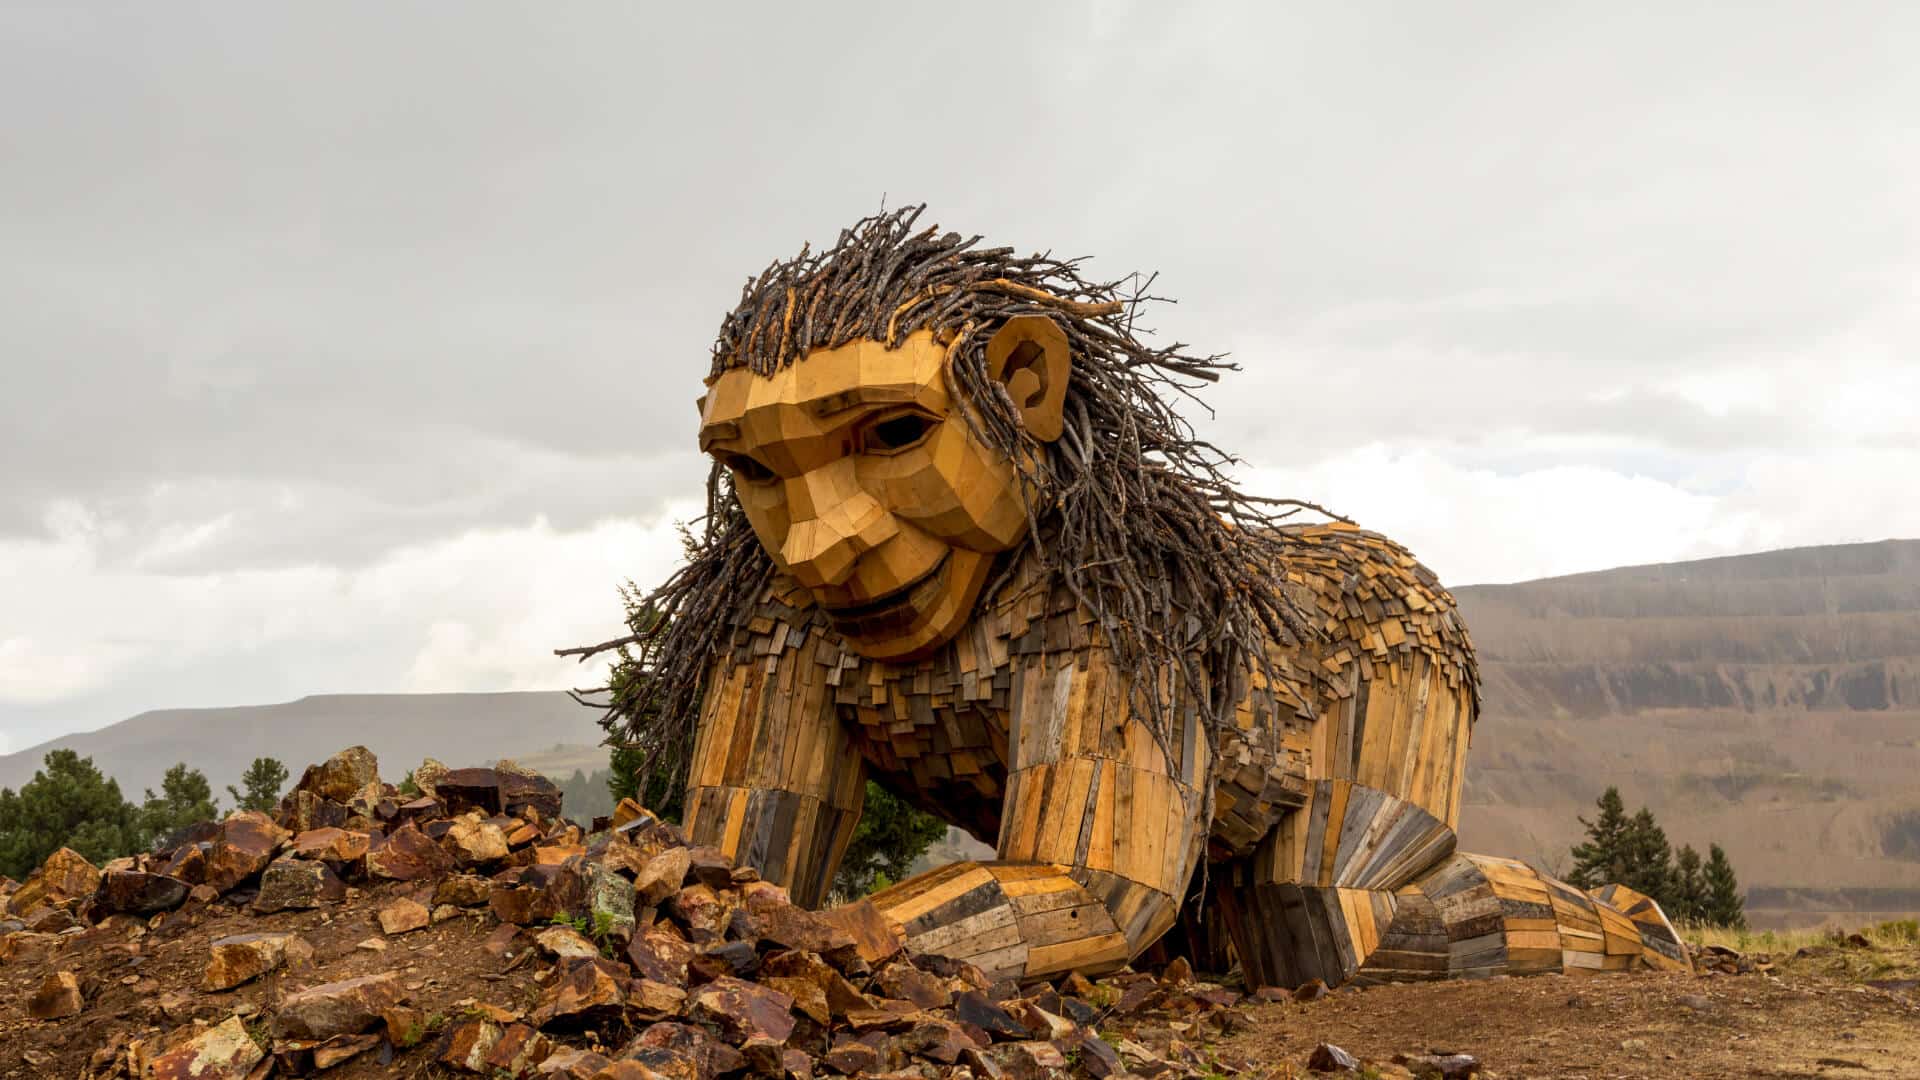 A large wood troll named Rita the Rock Planter made out of recycled wood kneeling in front of mountains.